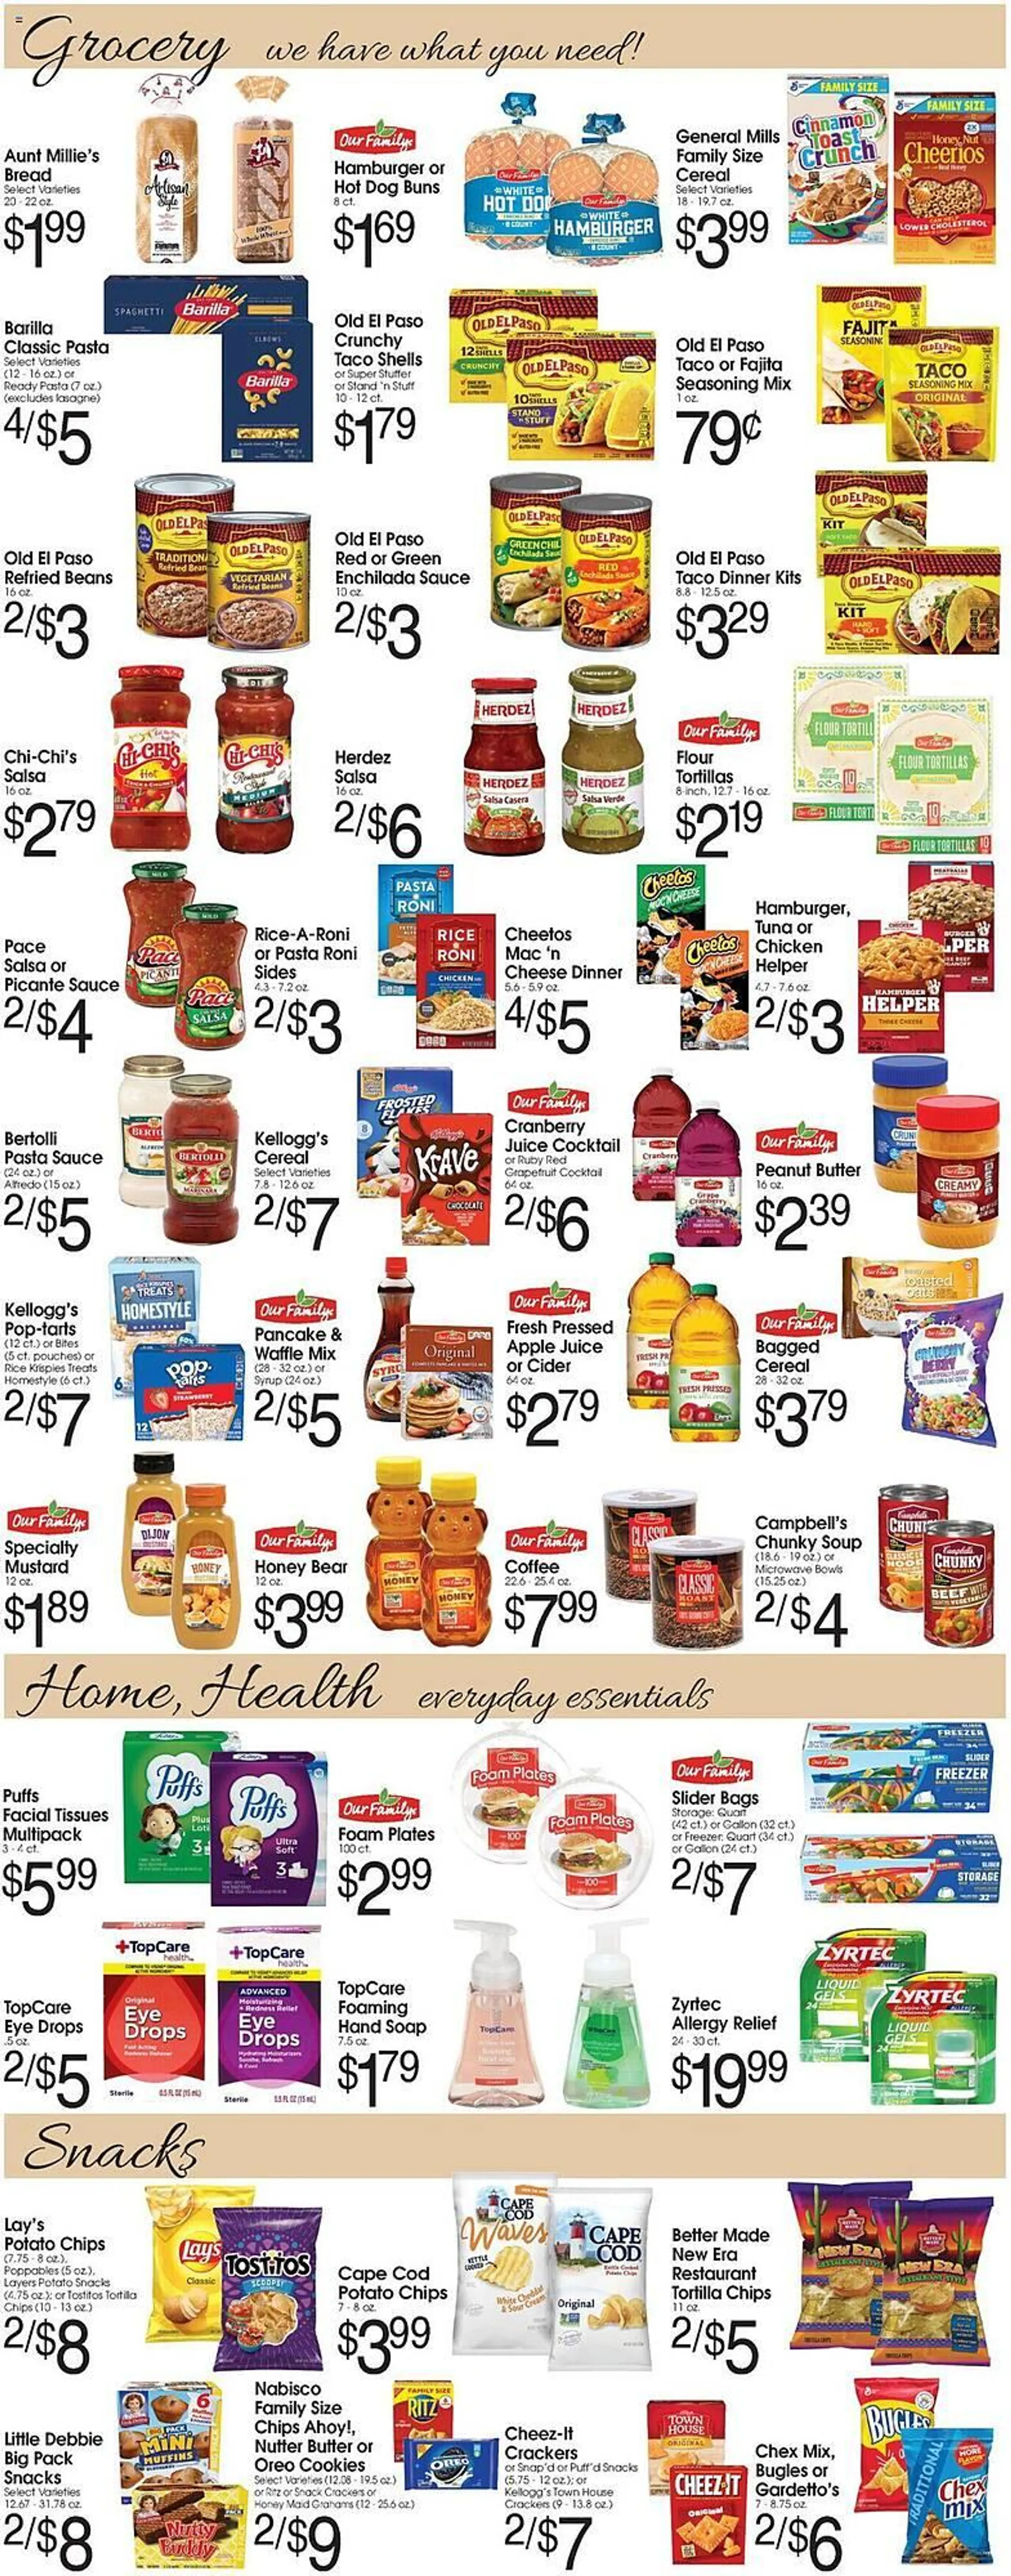 Festival Foods Weekly Ad - 2